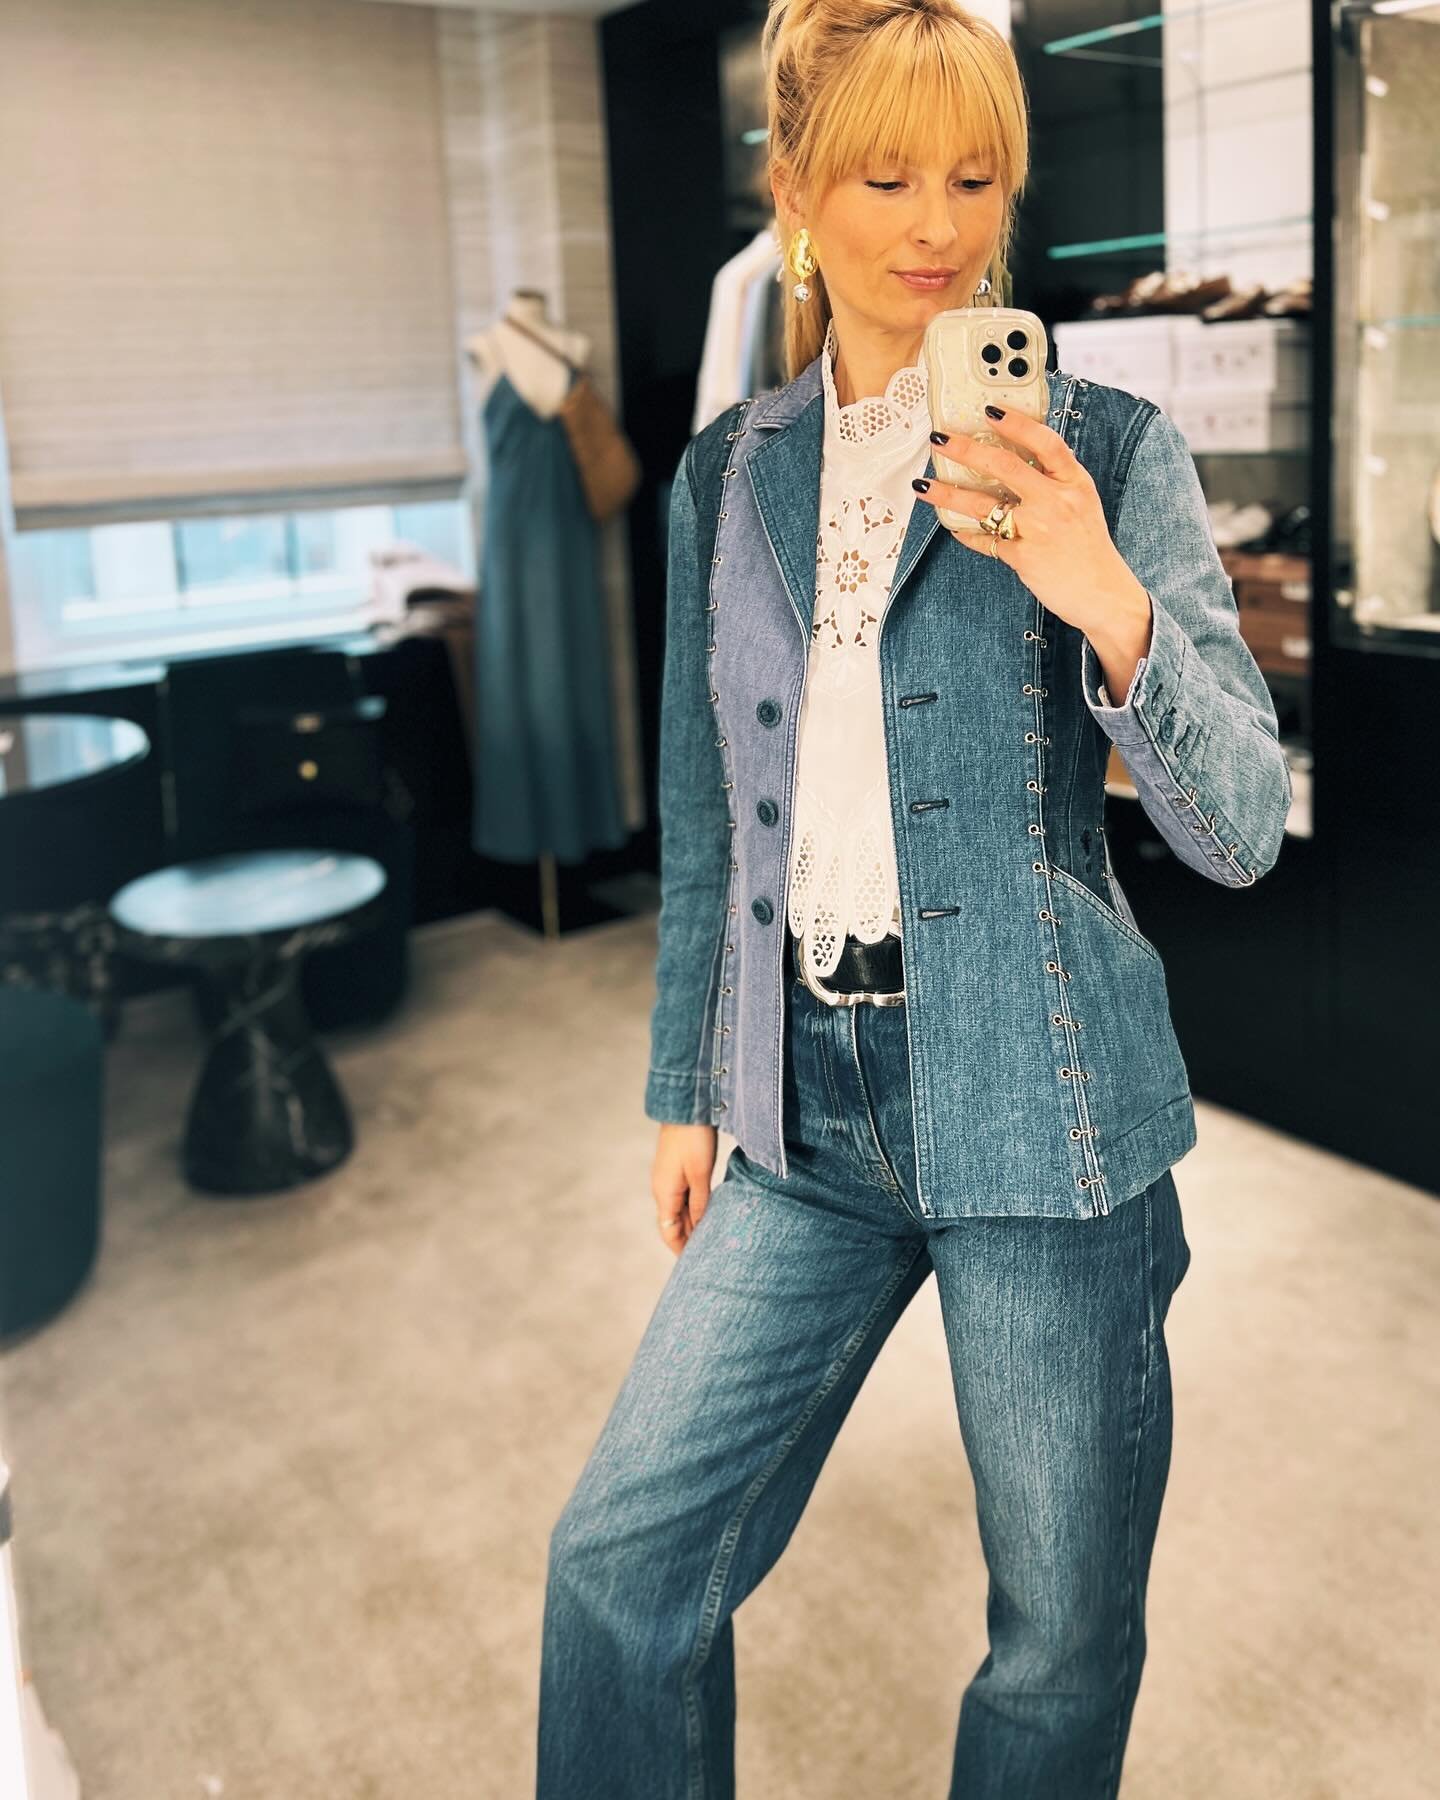 Don&rsquo;t tell @dior the jeans are @zara 🤫 Although if anyone else is watching @thenewlooktv on @appletv, it seems like Christian wouldn&rsquo;t have minded one bit. This show is making me an even bigger Dior fan than I was before ! As for Coco 👀